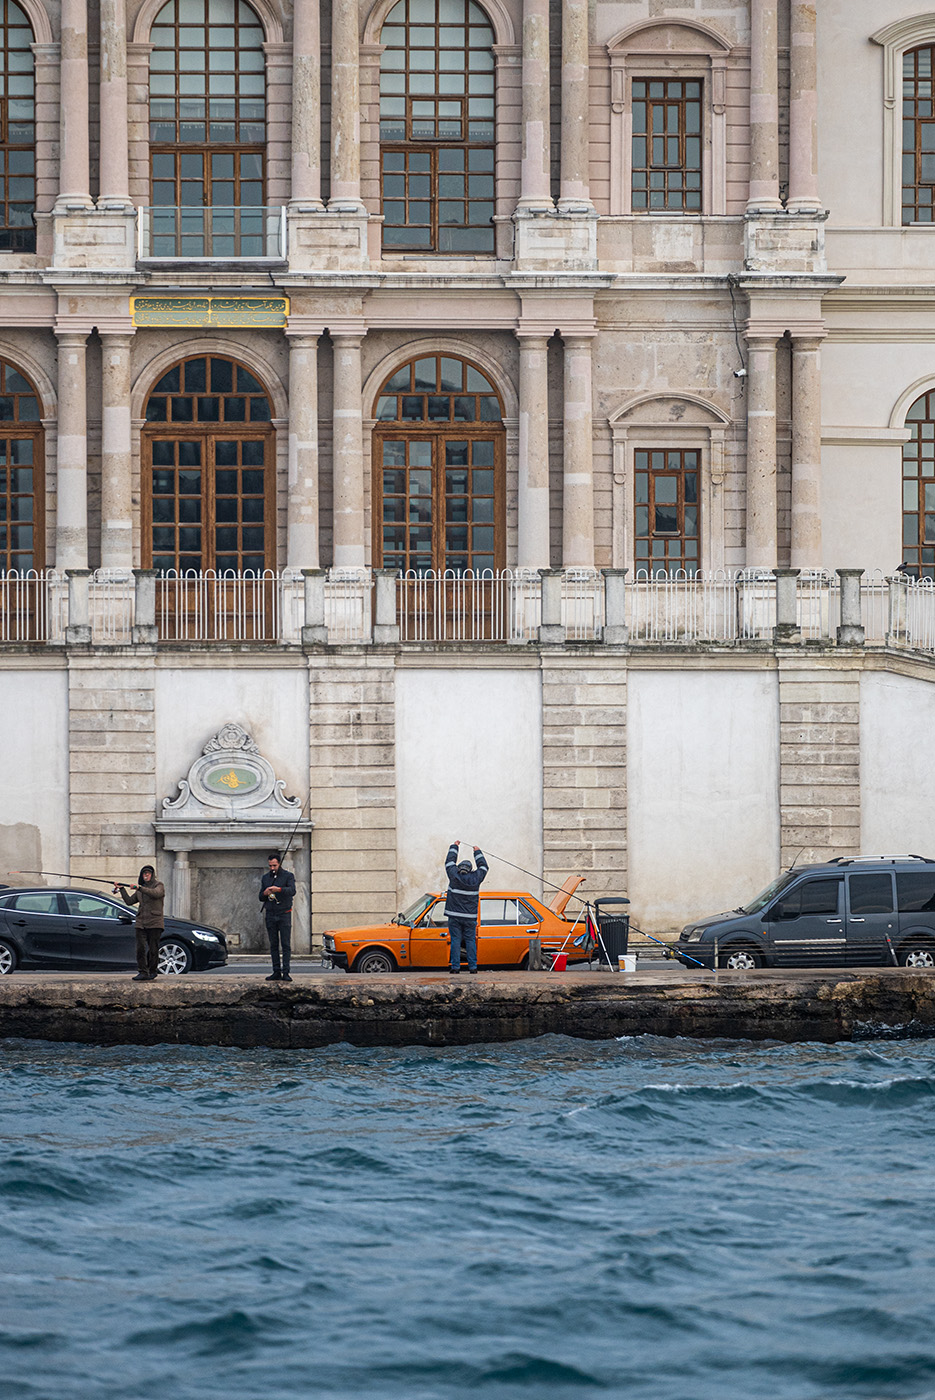 Fisherman setting up in front of an orange car